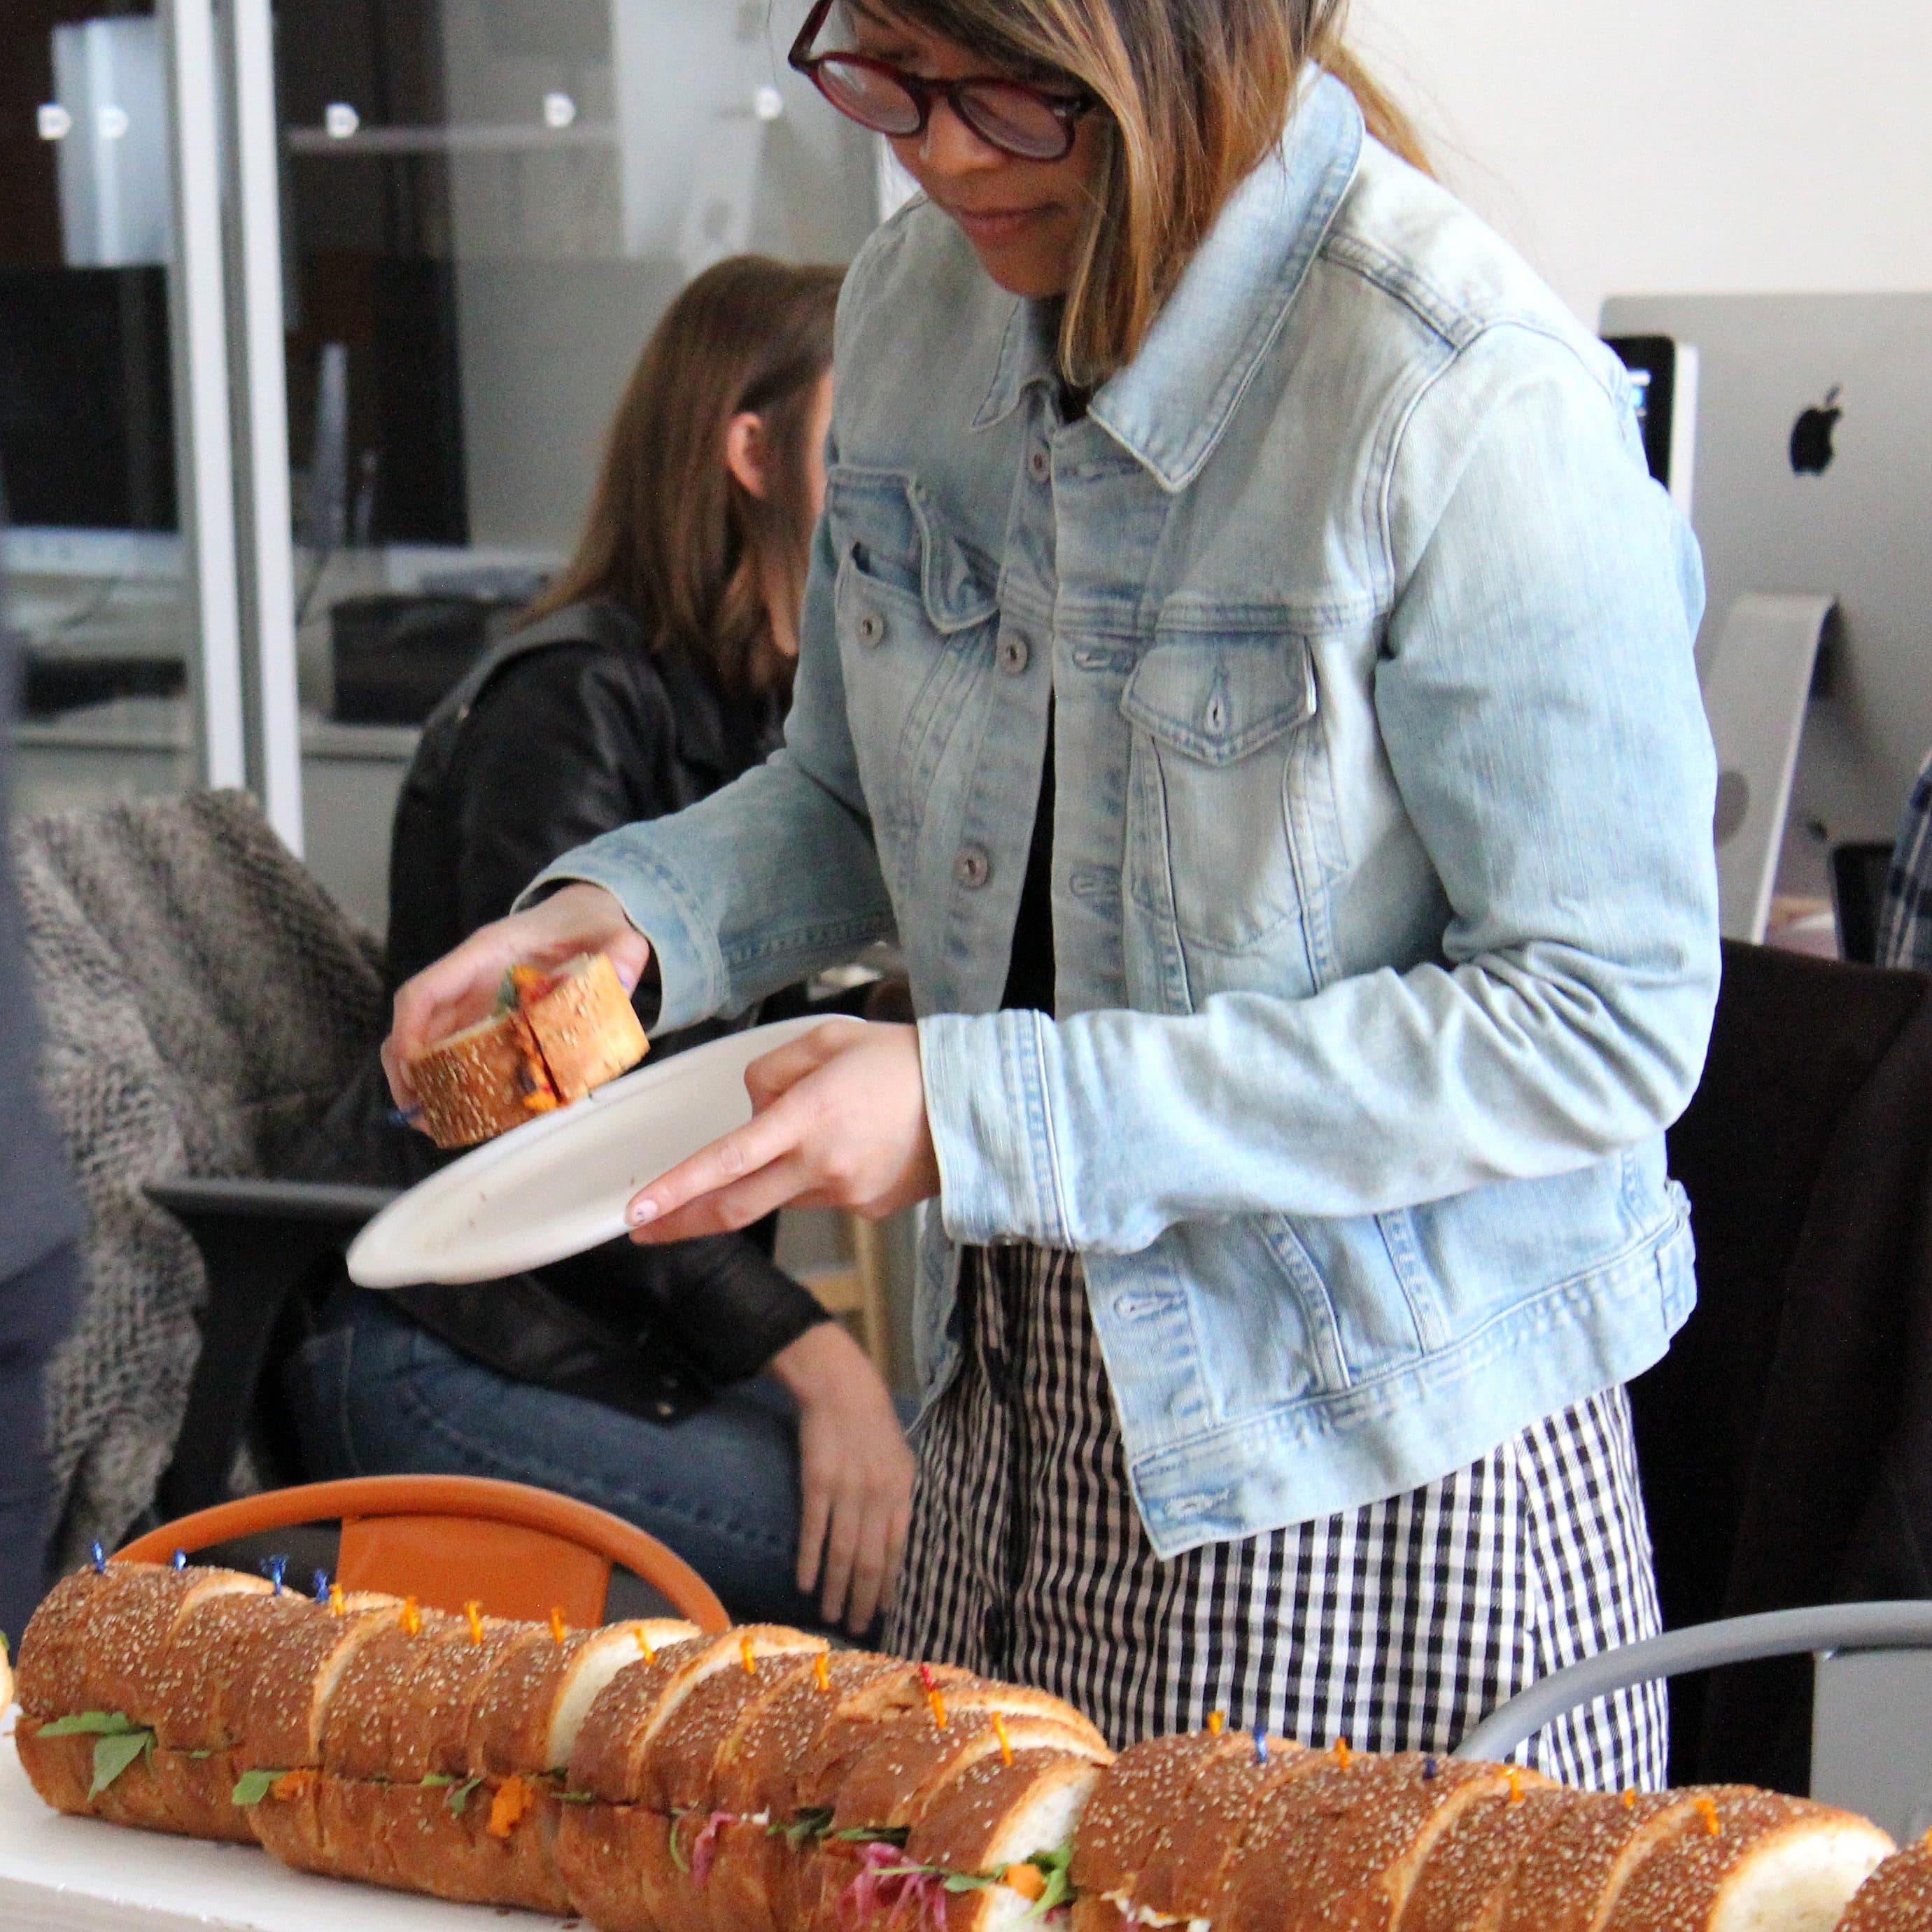 A person wearing glasses and a denim jacket is serving themselves a sandwich from a large sub that extends off the table. They hold a plate in one hand and use the other to pick up a sandwich section. In the background, other people are seated at desks with computers.